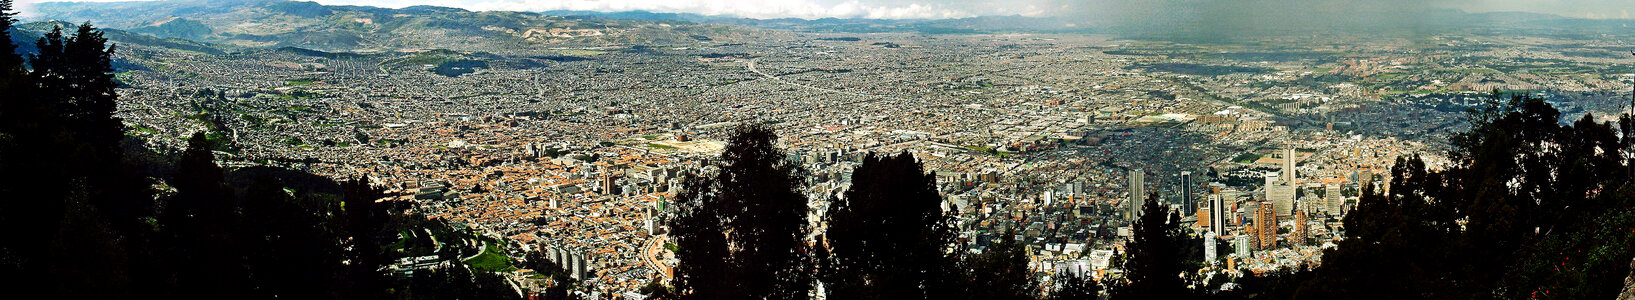 Panoramic Cityscape of the Metropolis of Bogota, Colombia photo